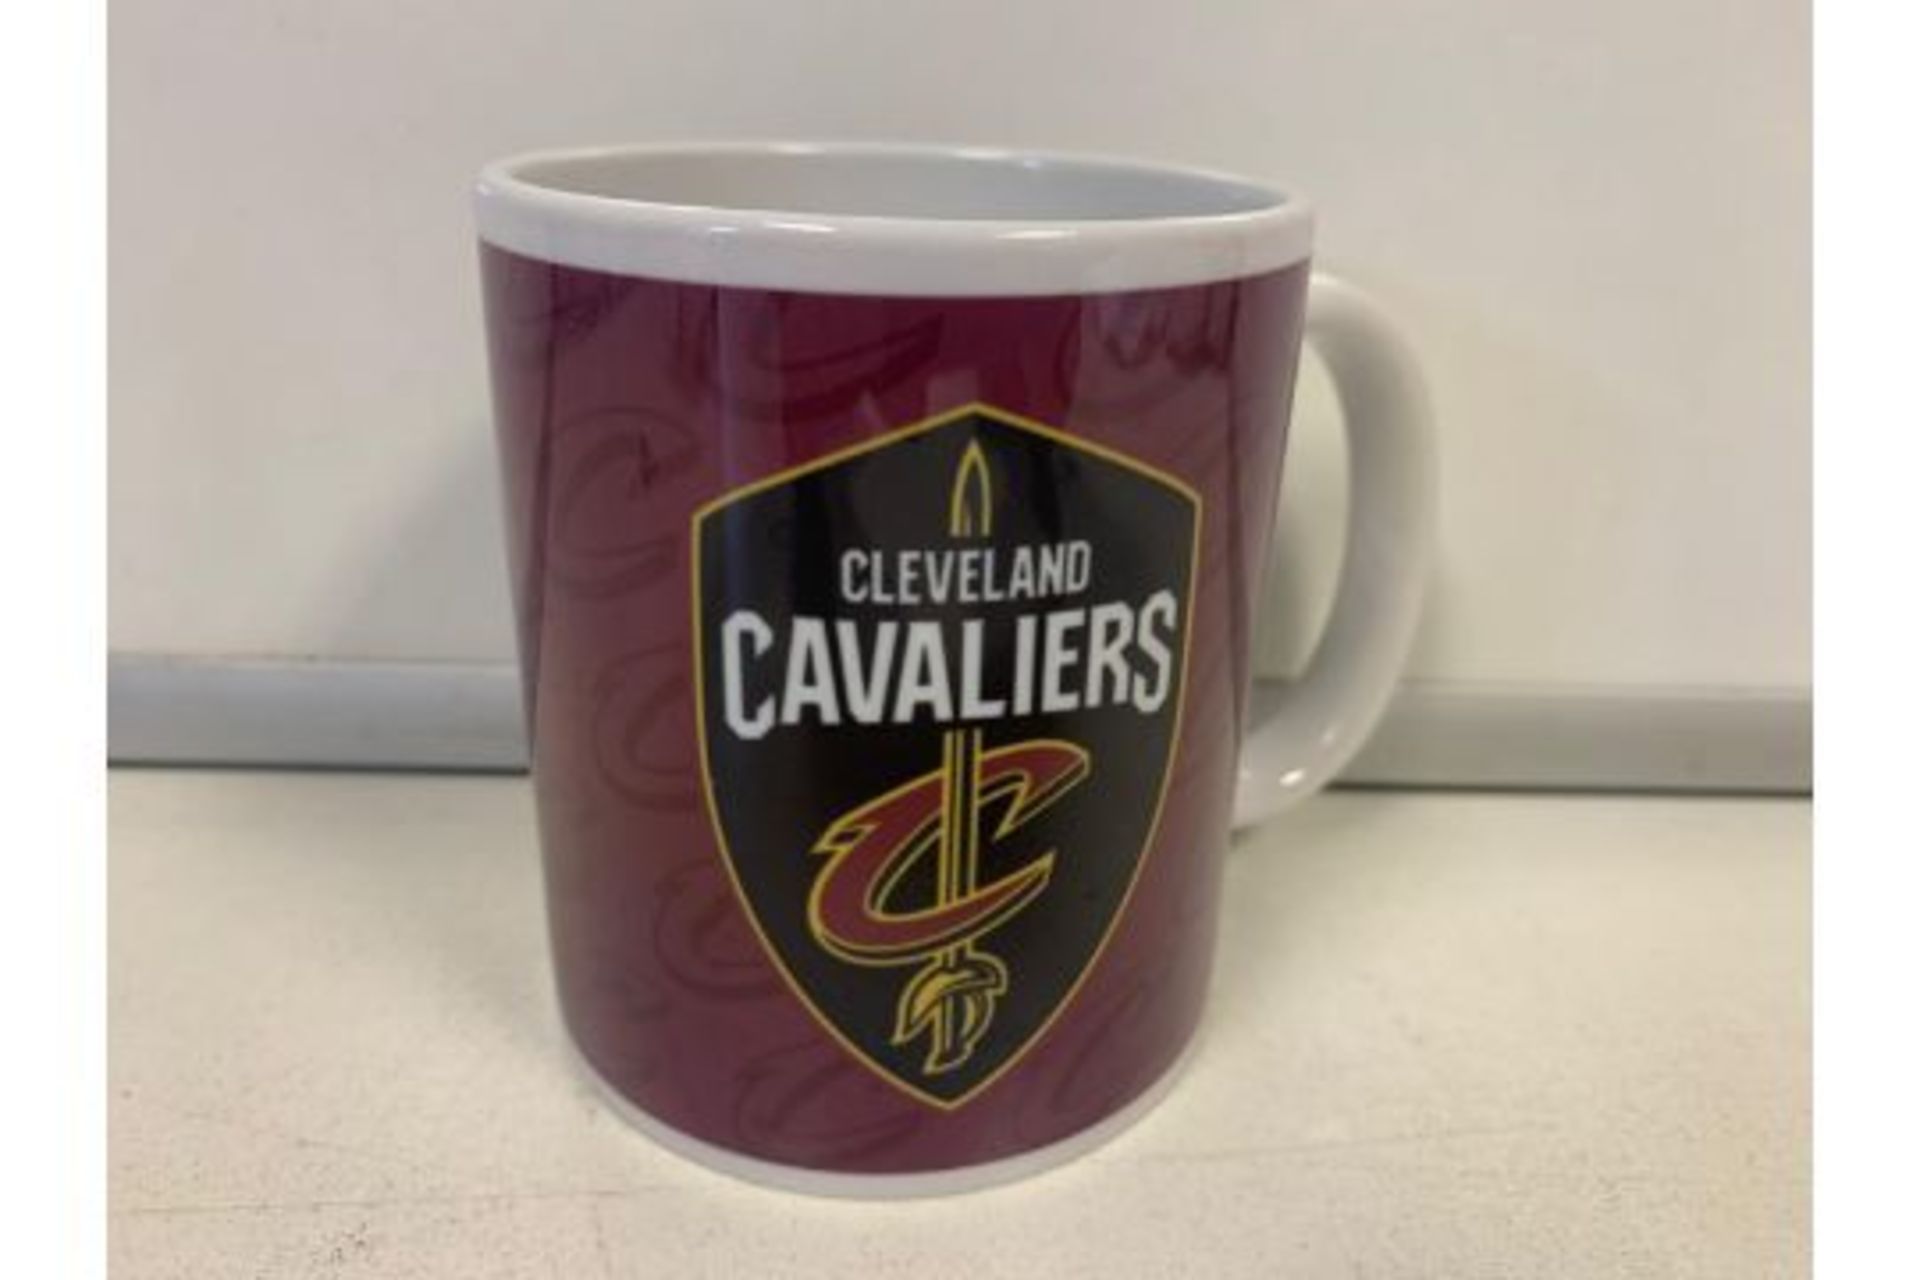 36 X BRAND NEW BOXED OFFICIAL CLEAVELAND CAVALIERS 110Z TEAM LOGO MUGS (284/12)